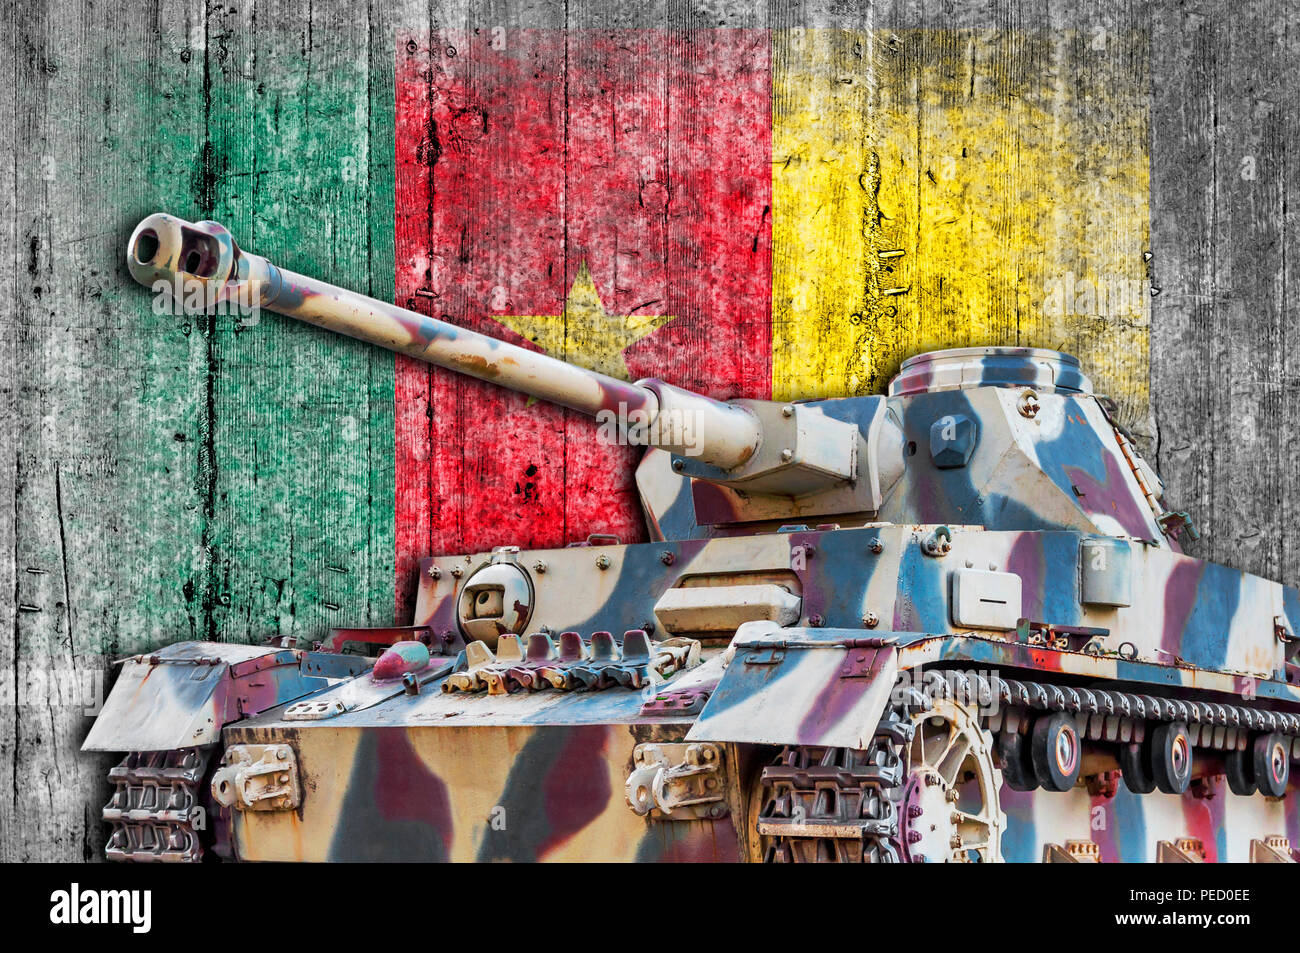 Military tank with concrete Cameroonian flag Stock Photo